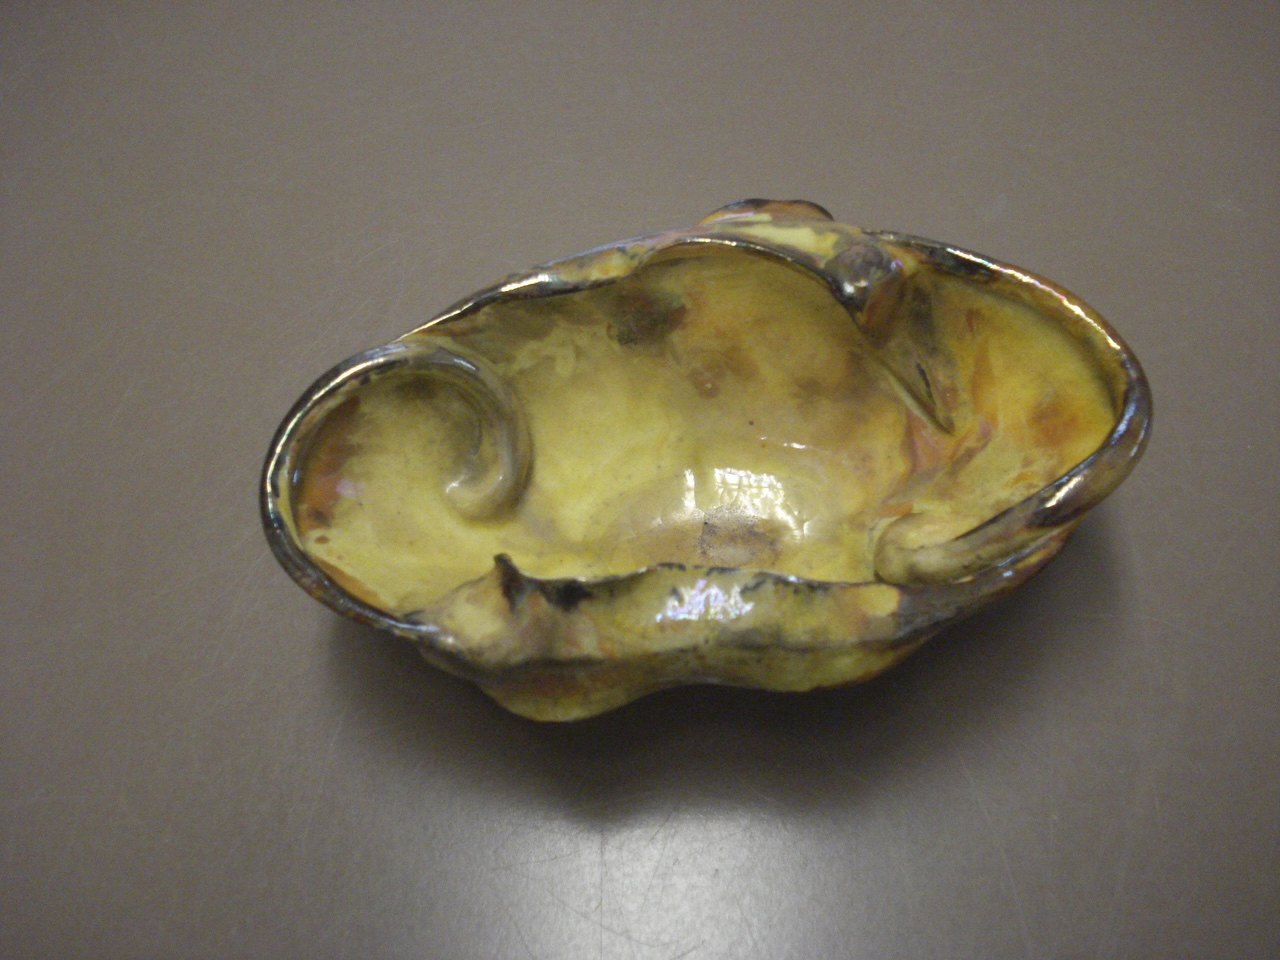 A Brower pottery dish.   COURTESY WESTHAMPTON BEACH HISTORICAL SOCIETY